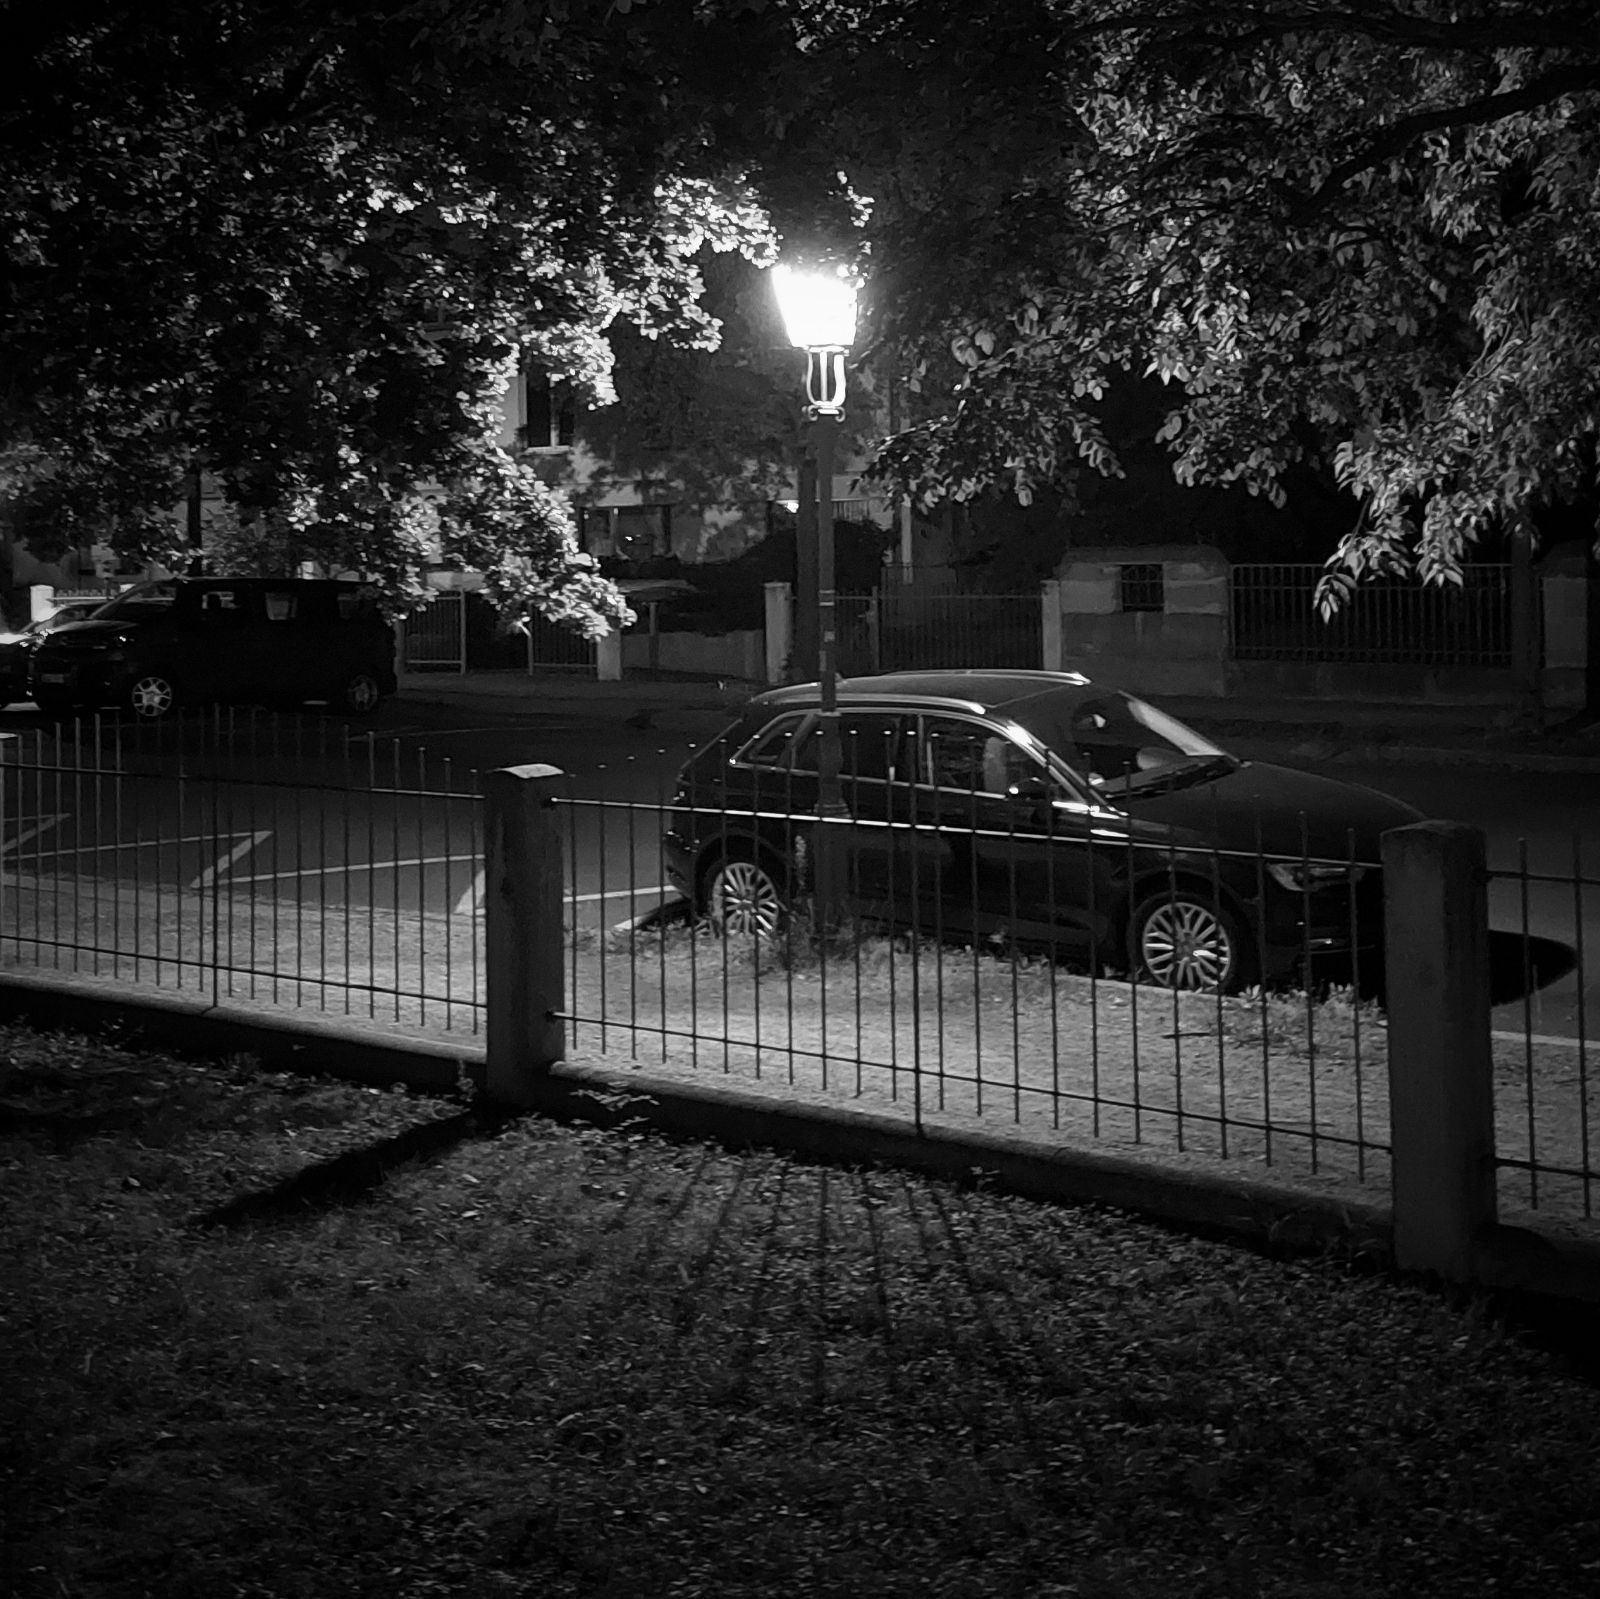 Streetlights under trees. A lonely car, a rusty fence and its shadow. Monochrome.